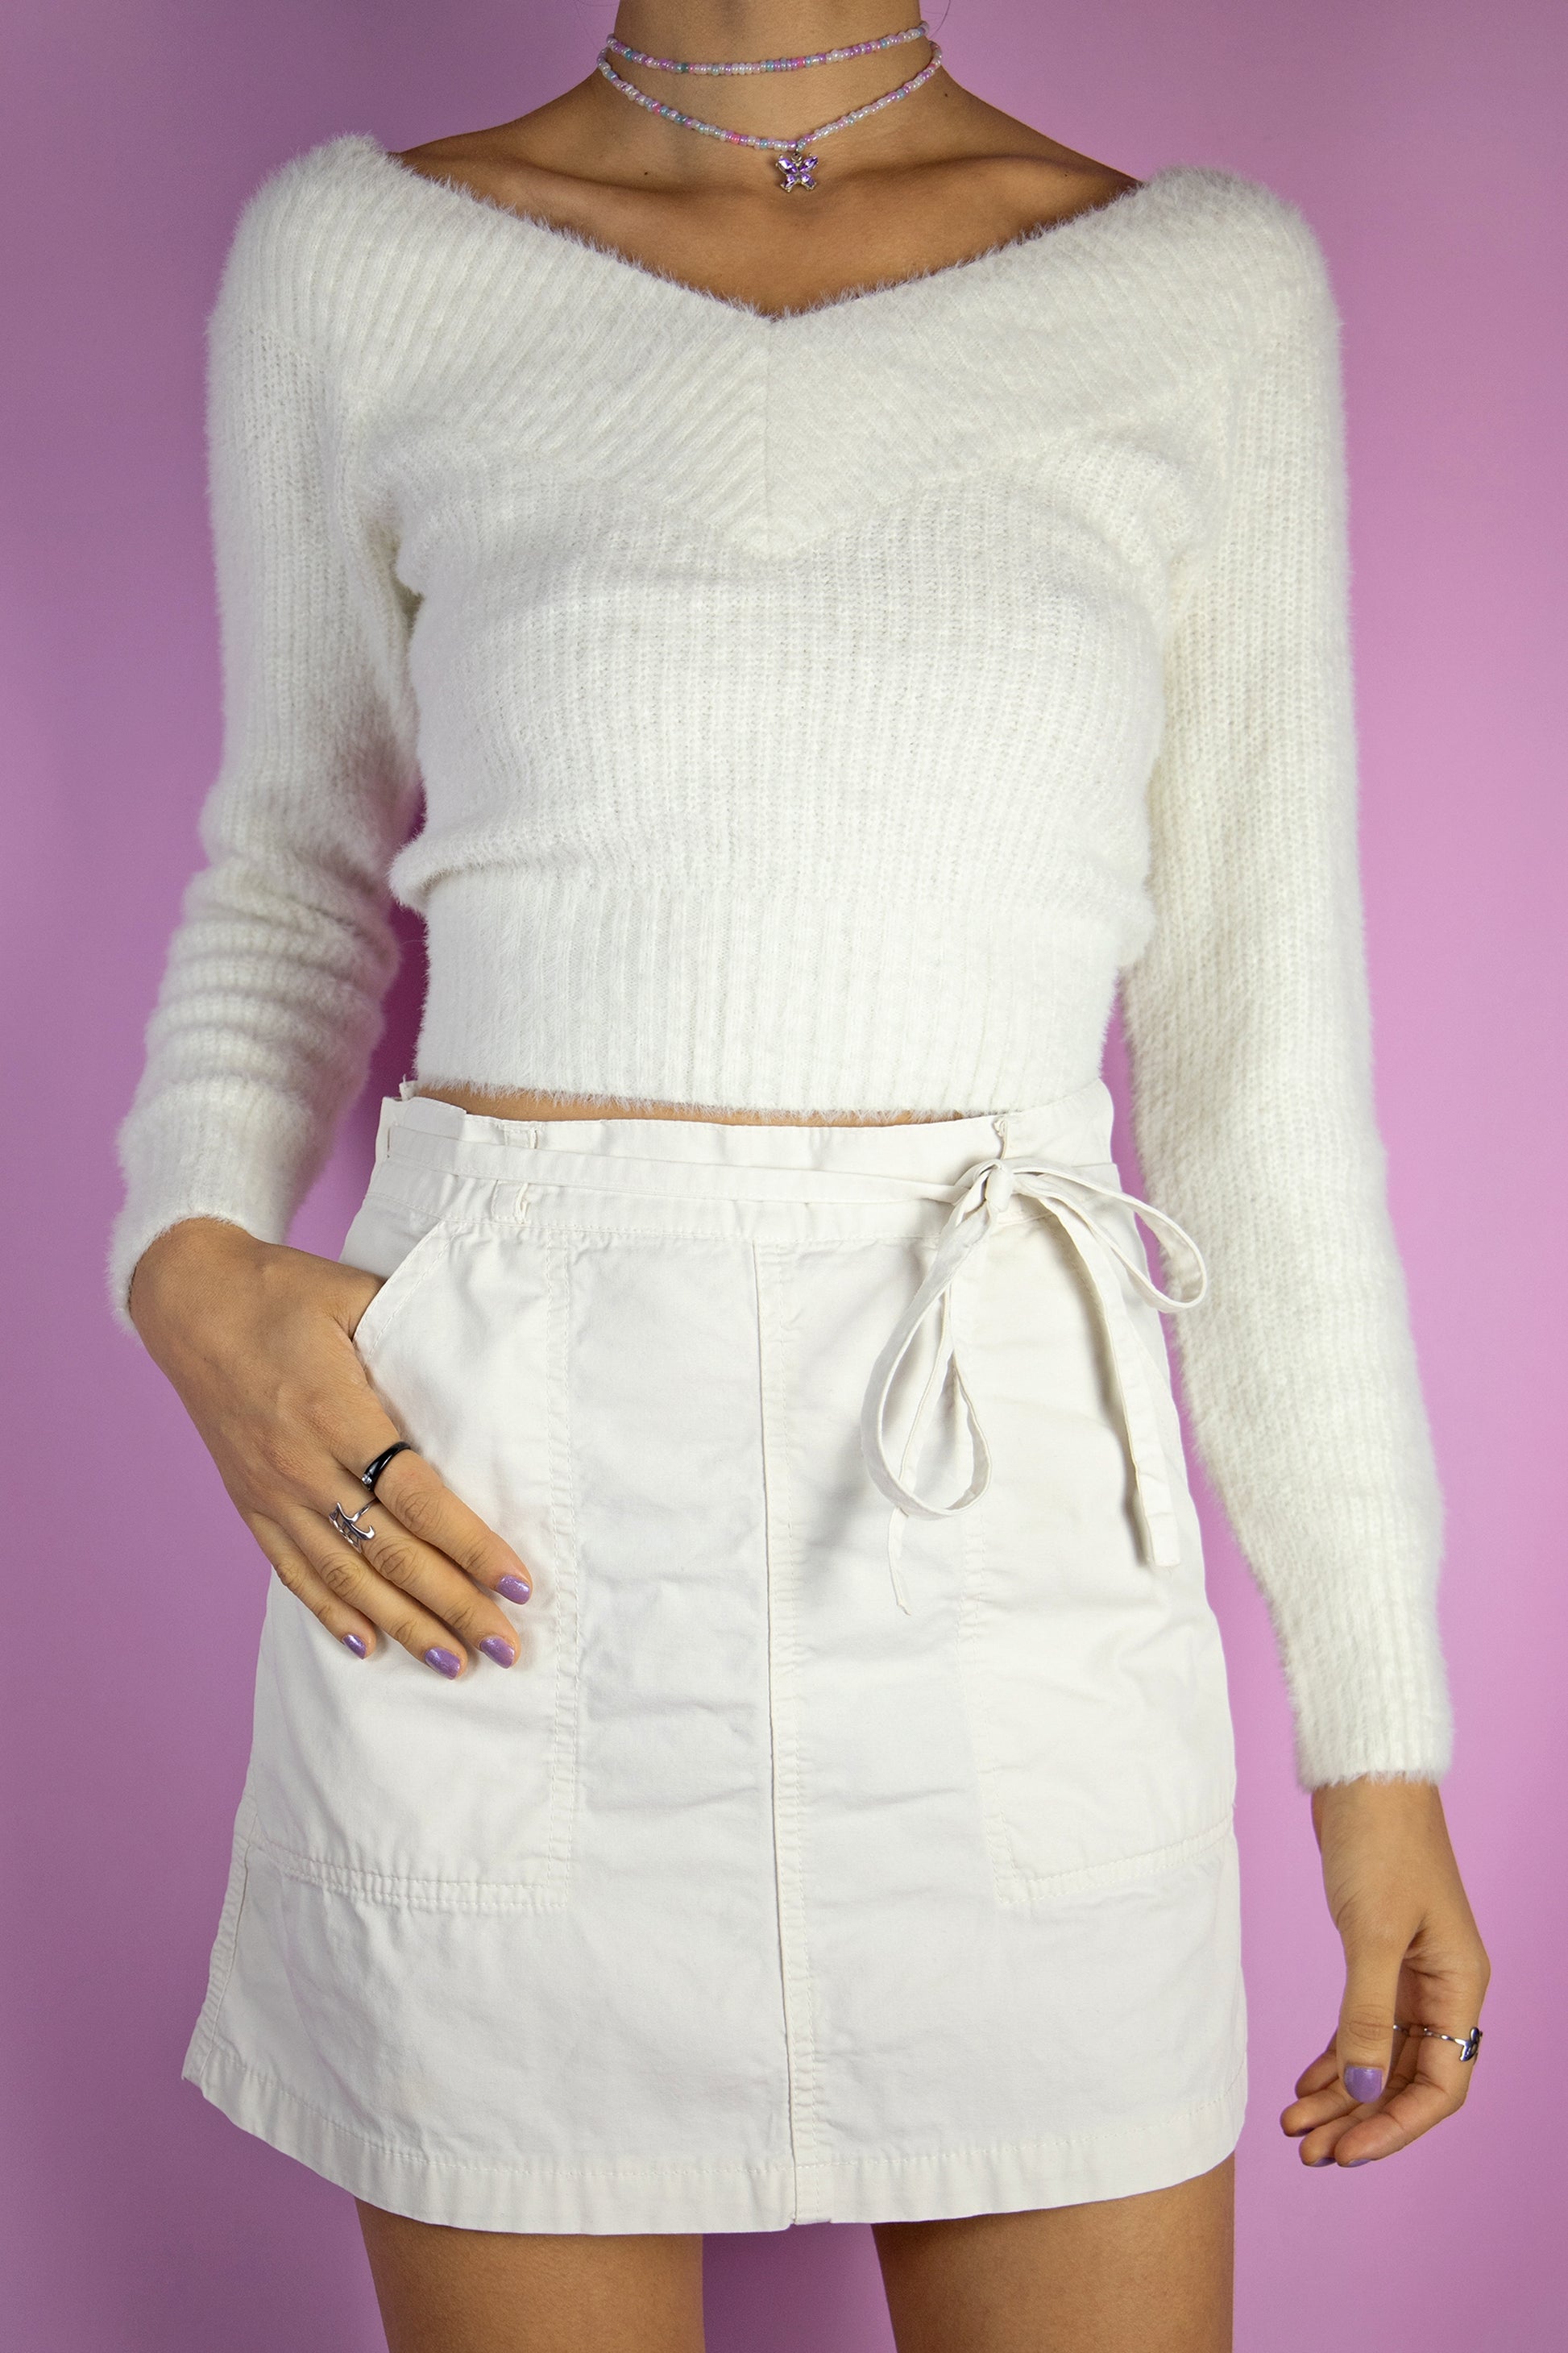 The Vintage 90's White Wrap Mini Skirt is a beige-white wrap mini skirt with a side tie and pockets. Super cute utility subversive cyber grunge style, circa the 1990s.